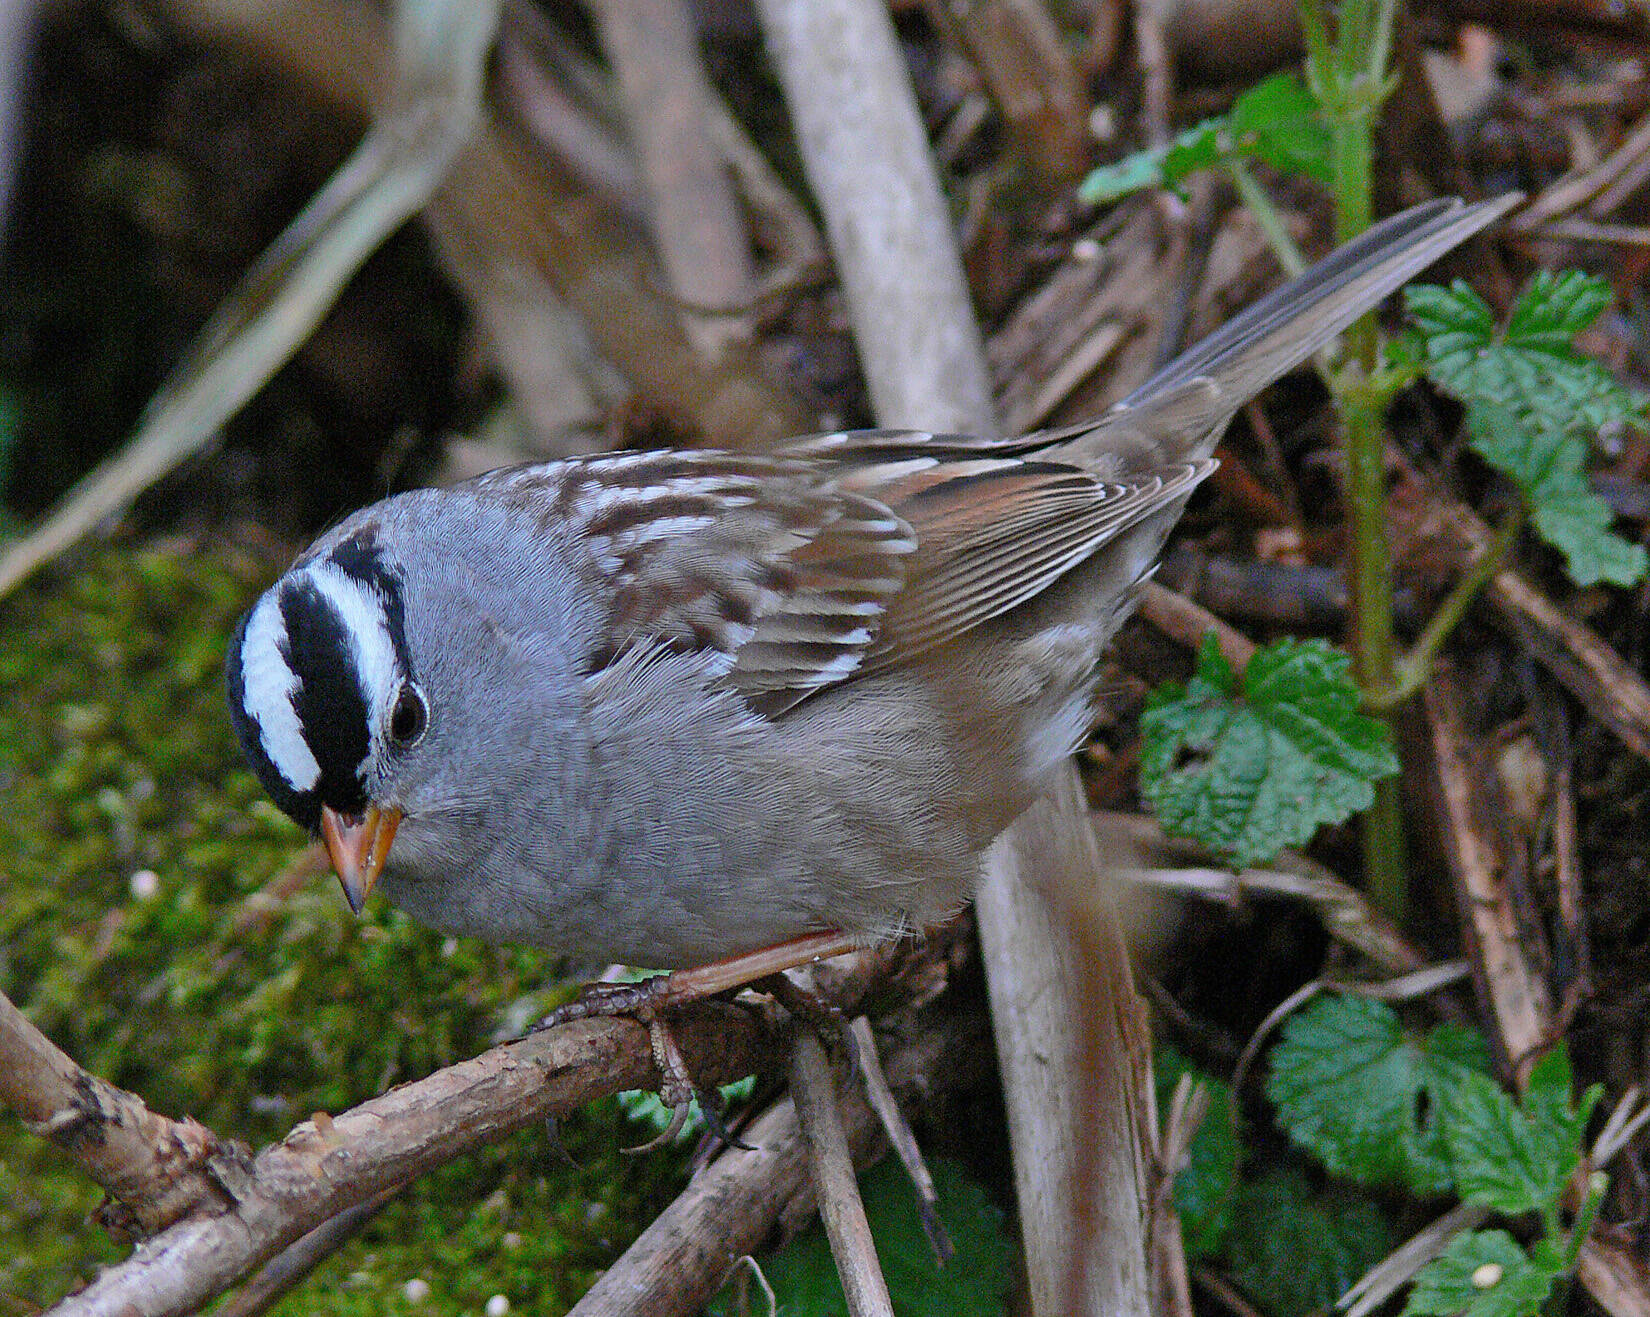 White-crowned sparrows were flocking with golden-crowns along the beach route. (Courtesy Photo / Bob Armstrong)